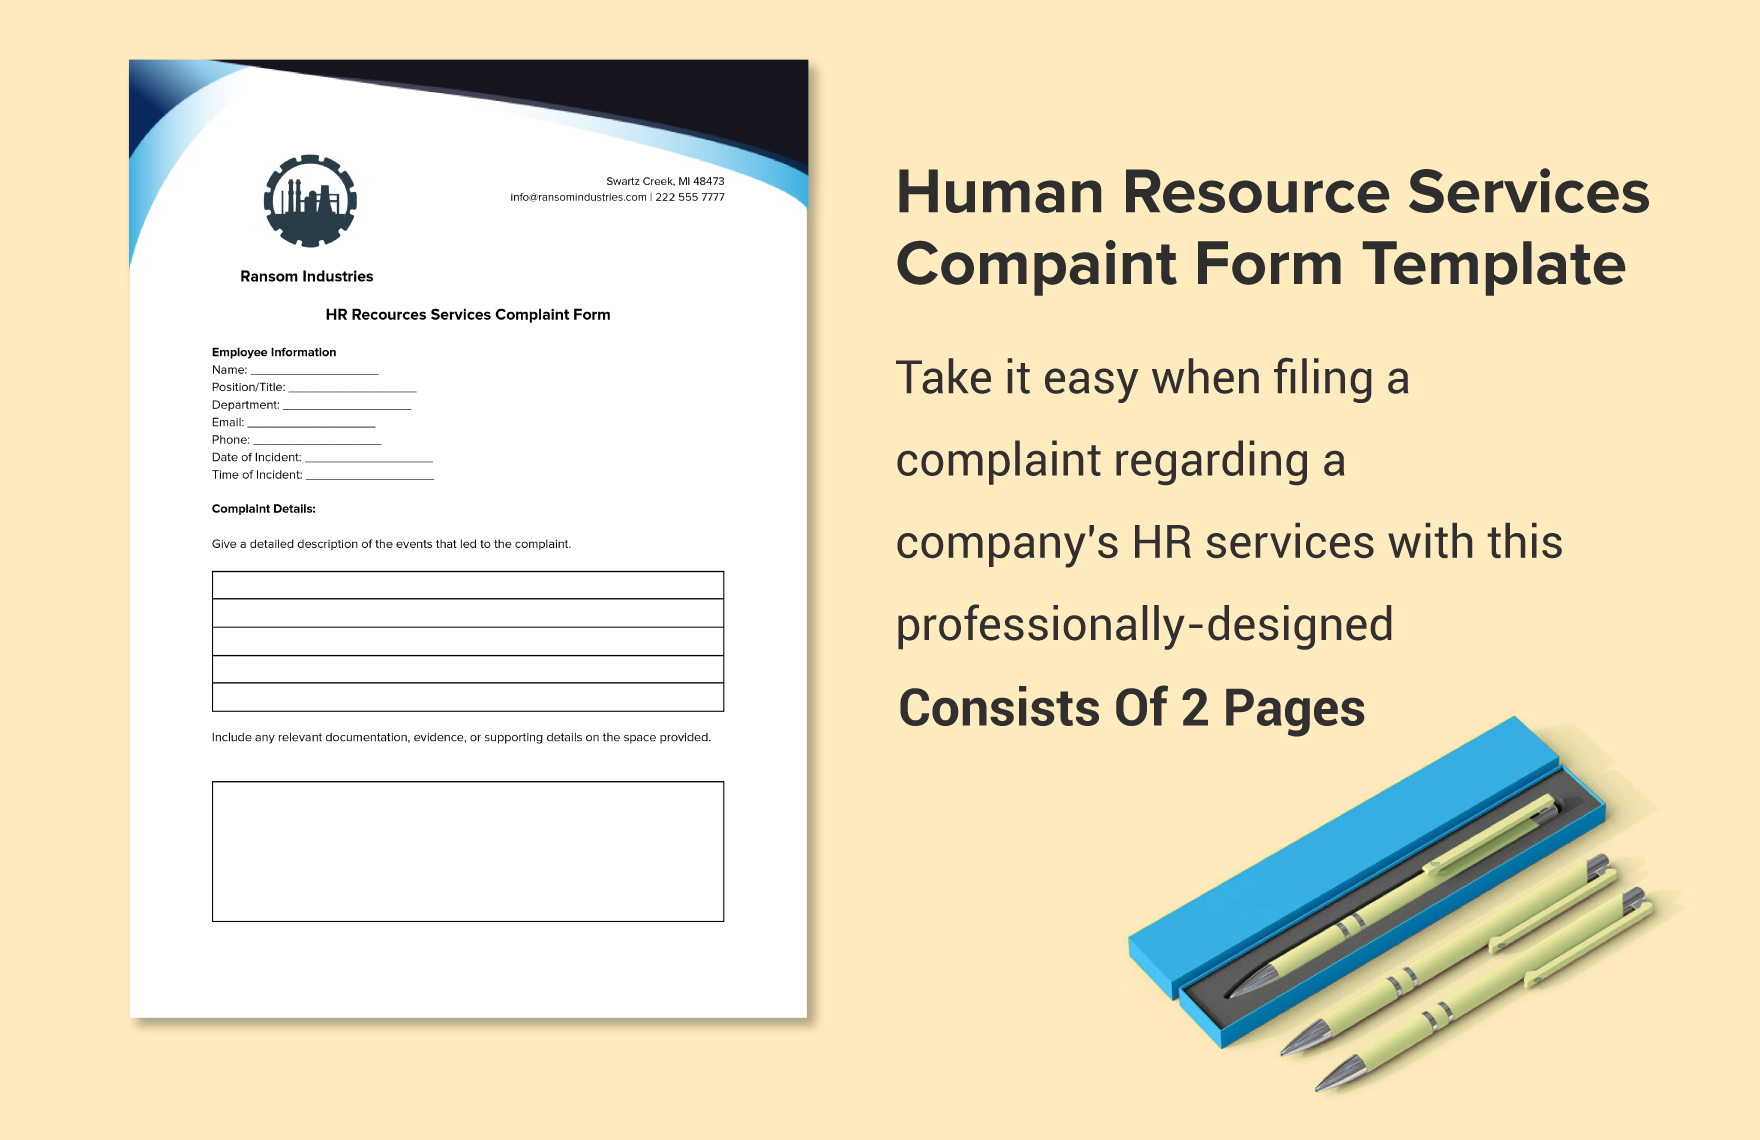 Human Resource Services Complaint Form Template